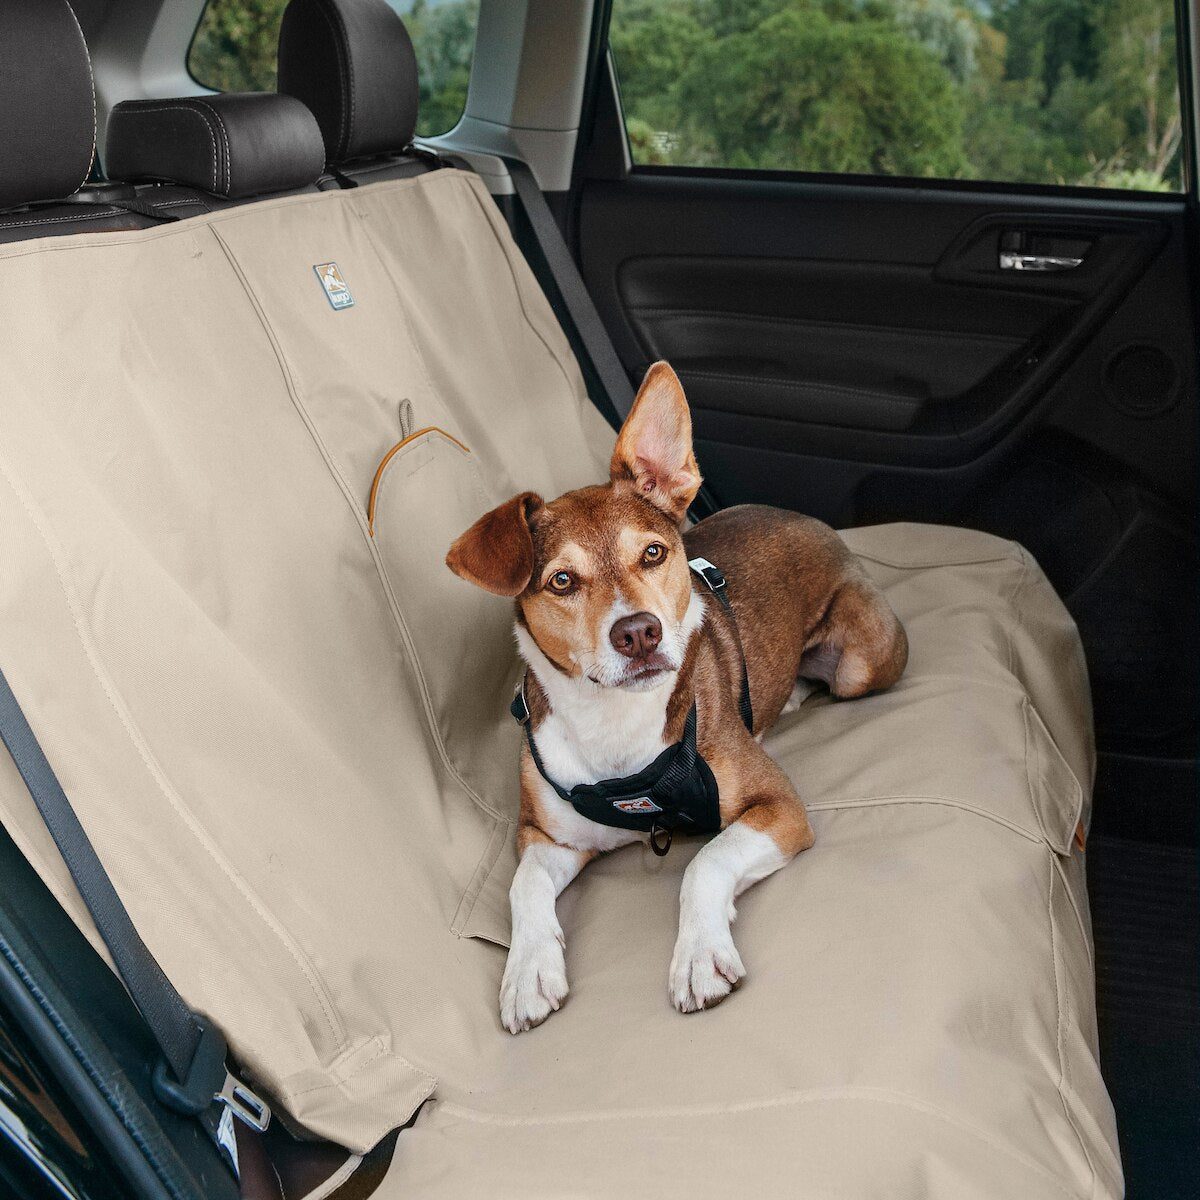 how many dogs die in truck beds